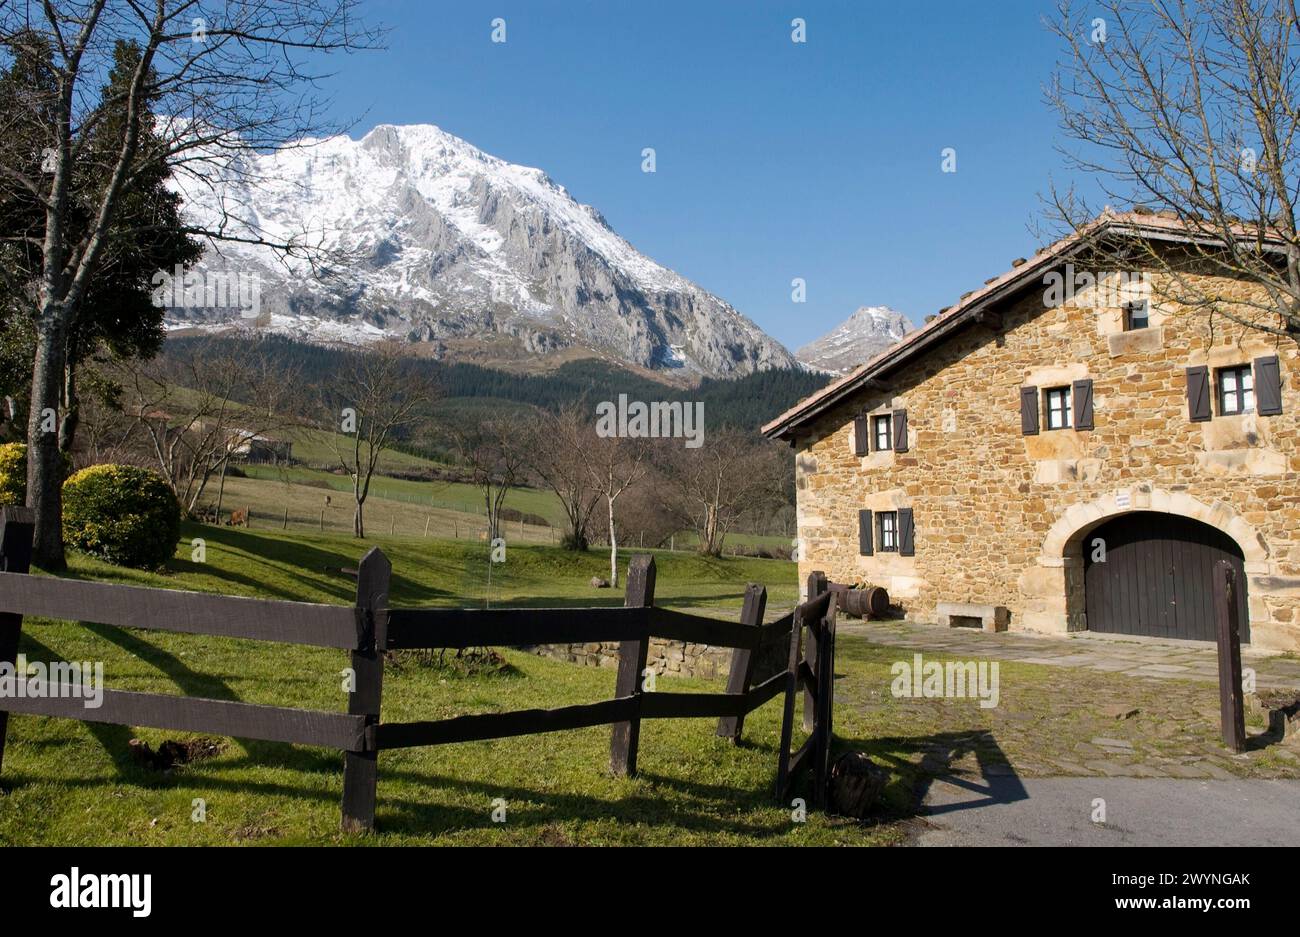 Mount Amboto and rural house, Axpe, Valley of Atxondo, Biscay, Basque Country, Spain. Stock Photo